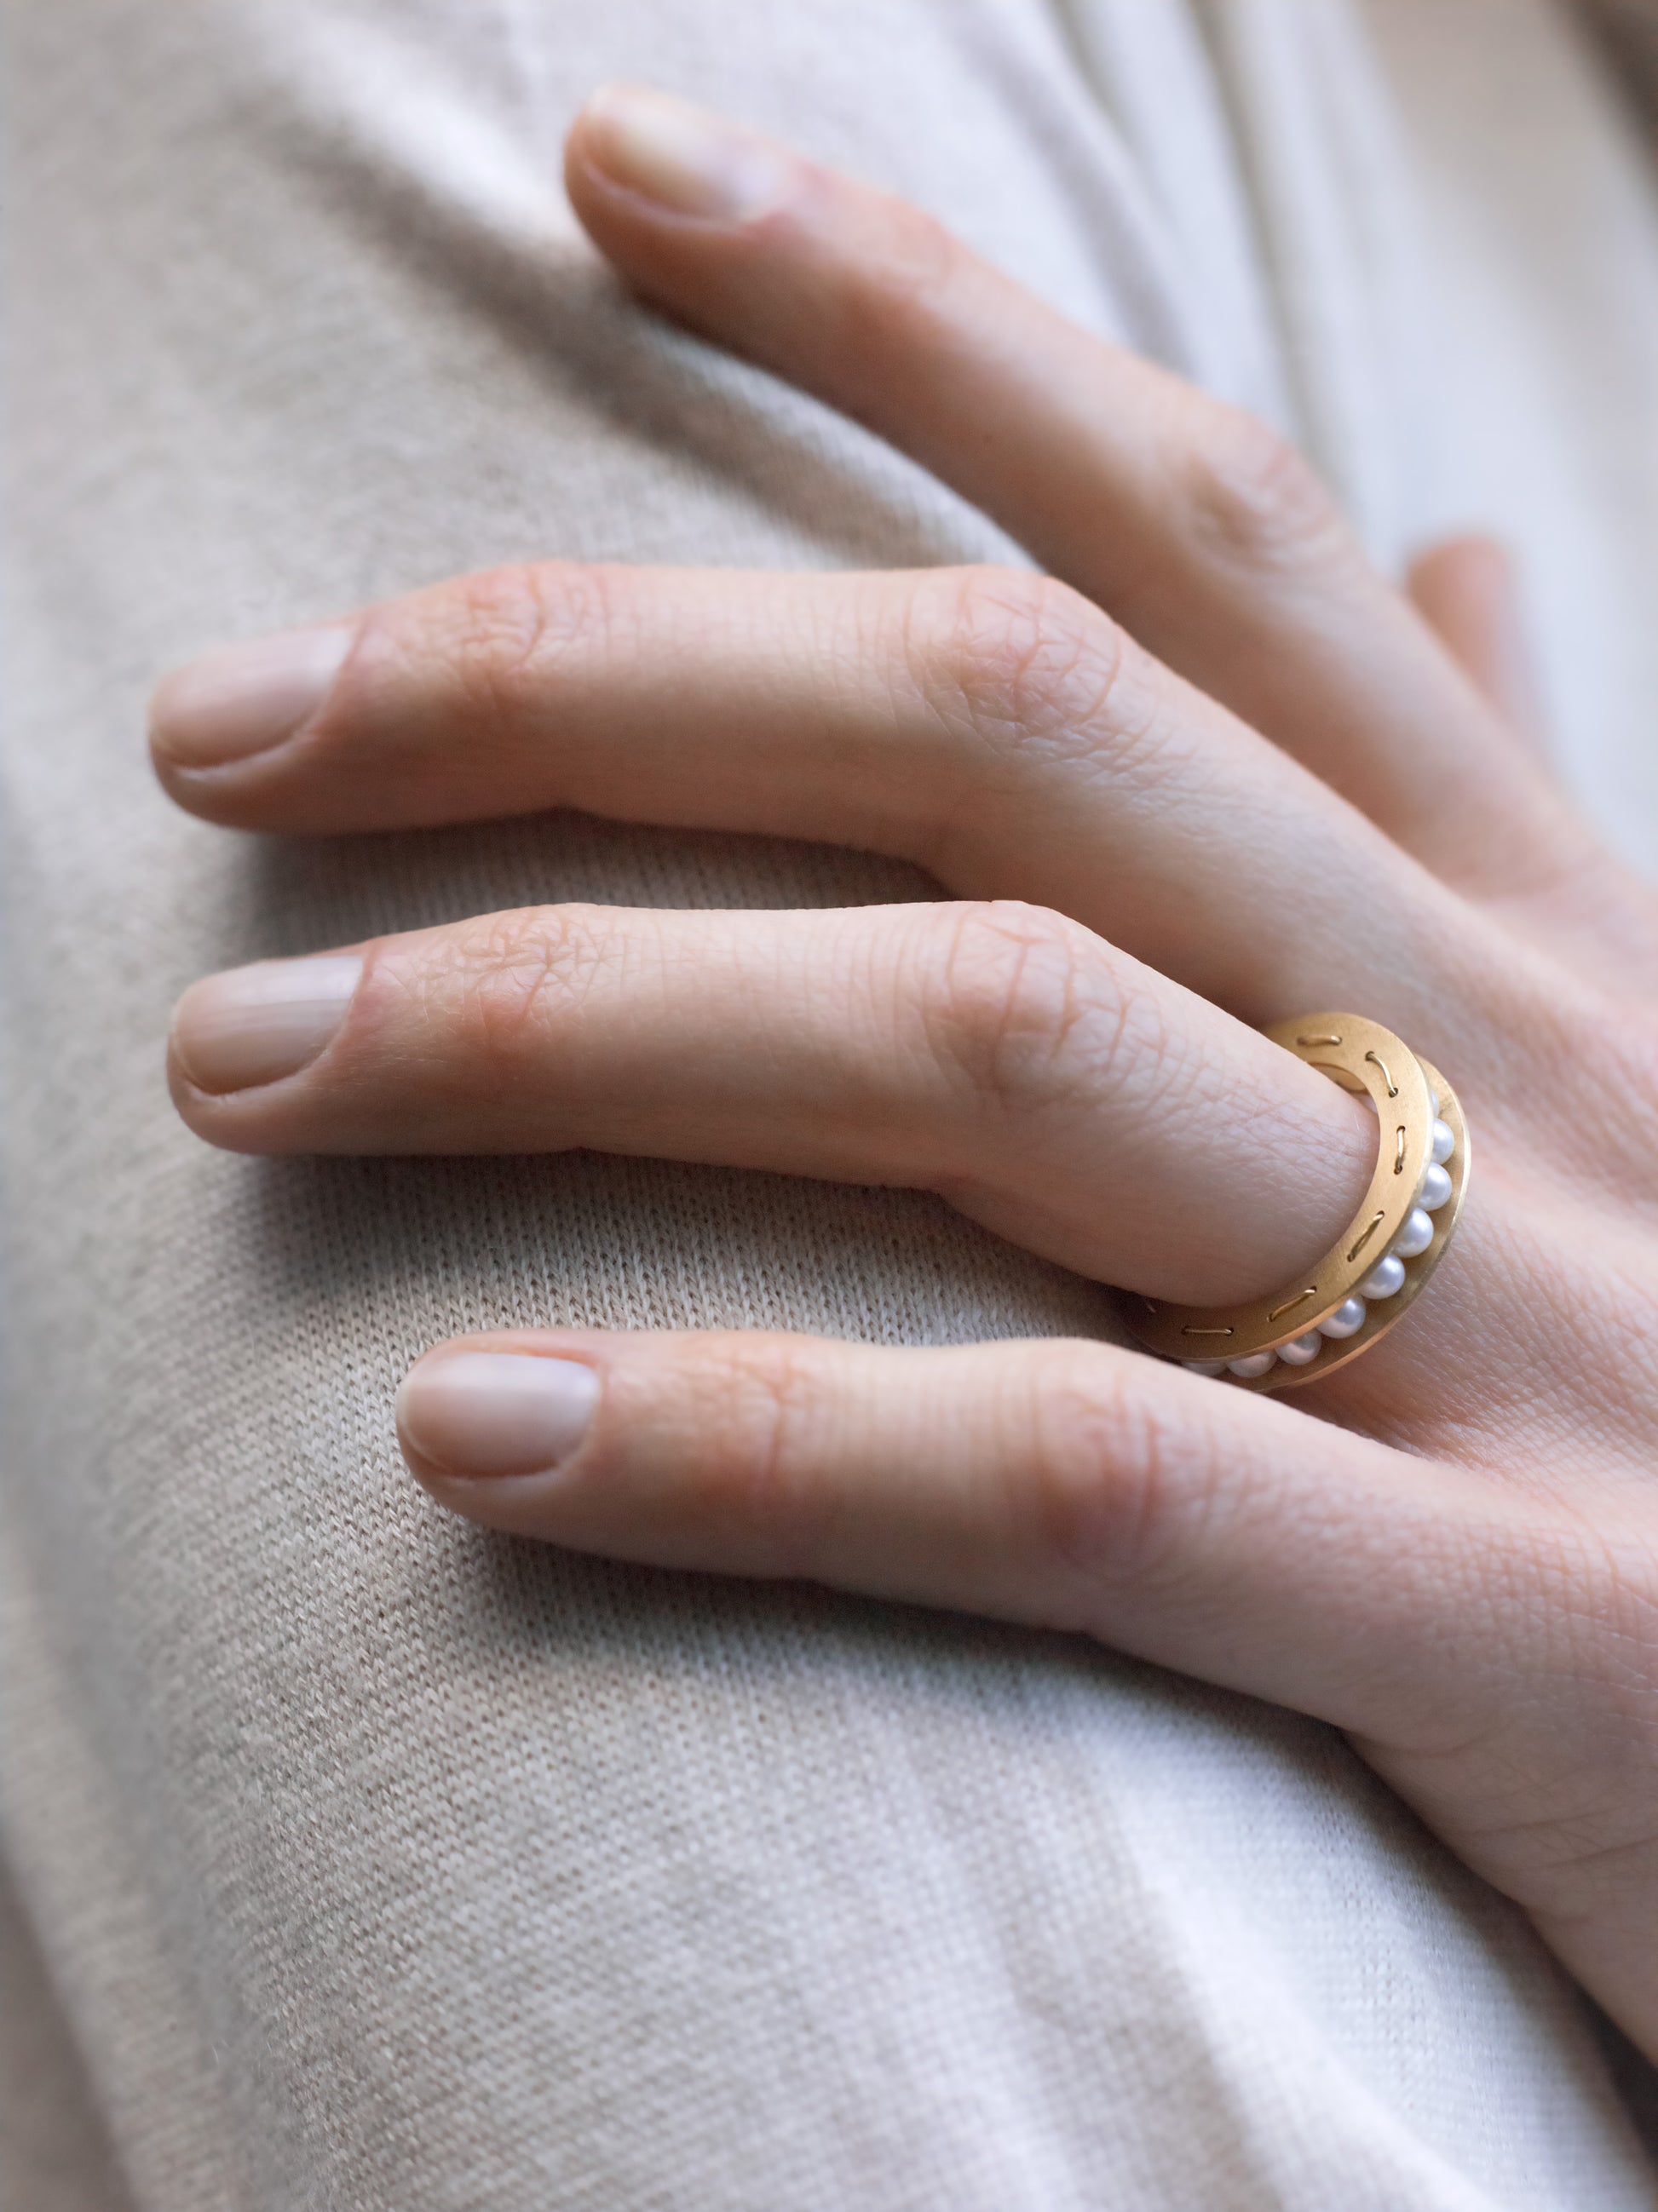 18KT yellow gold ring with freshwater pearls worn by female hand - Sfere